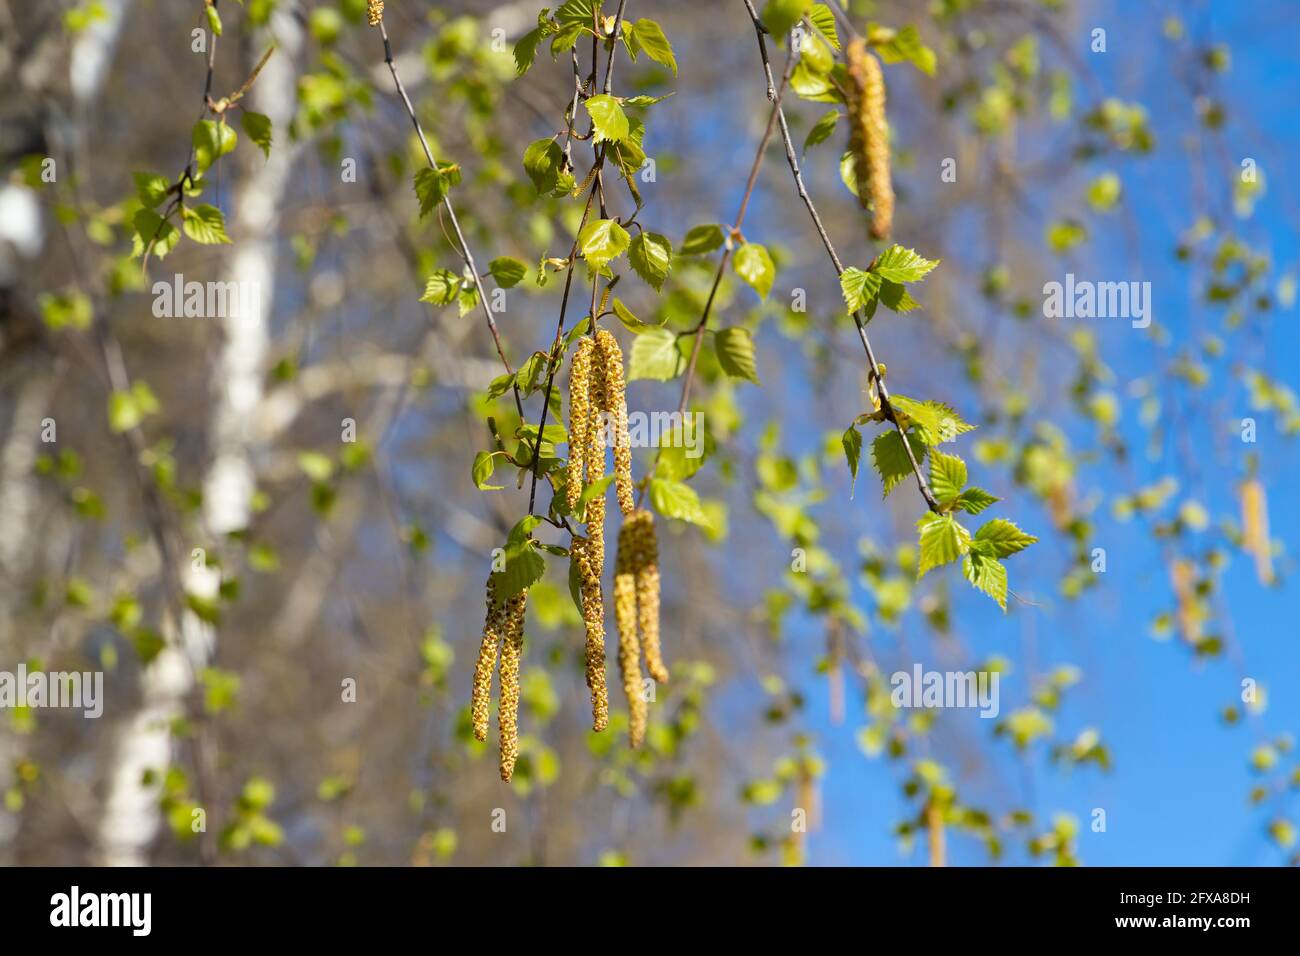 Birch tree branches with fresh green leaves and flowers with yellow pollen Stock Photo